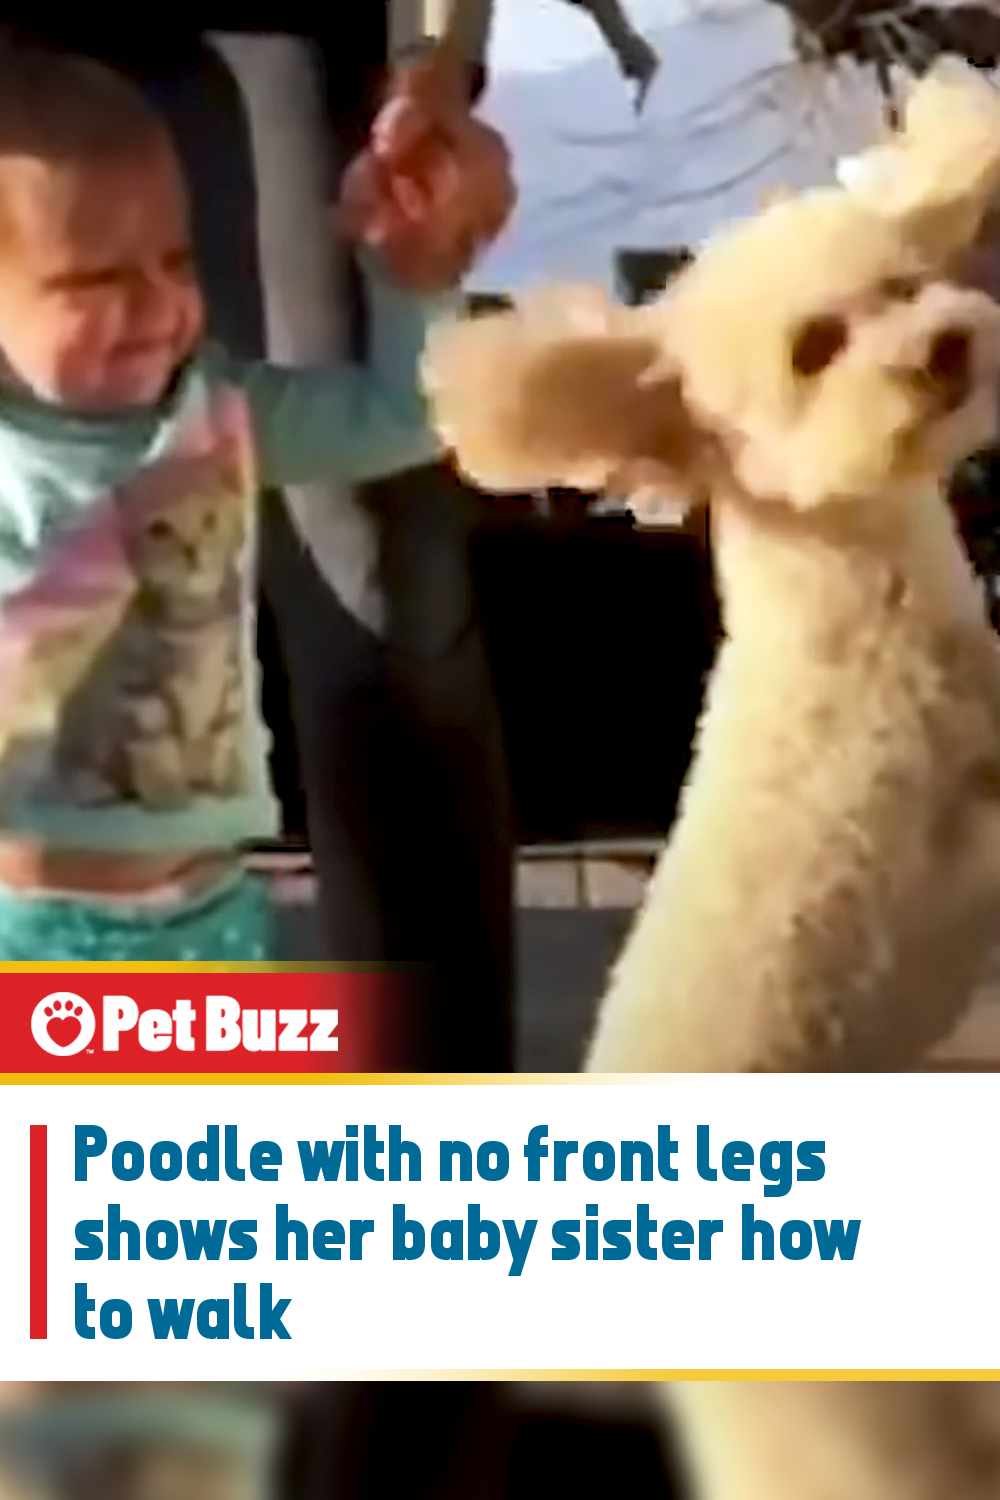 Poodle with no front legs shows her baby sister how to walk